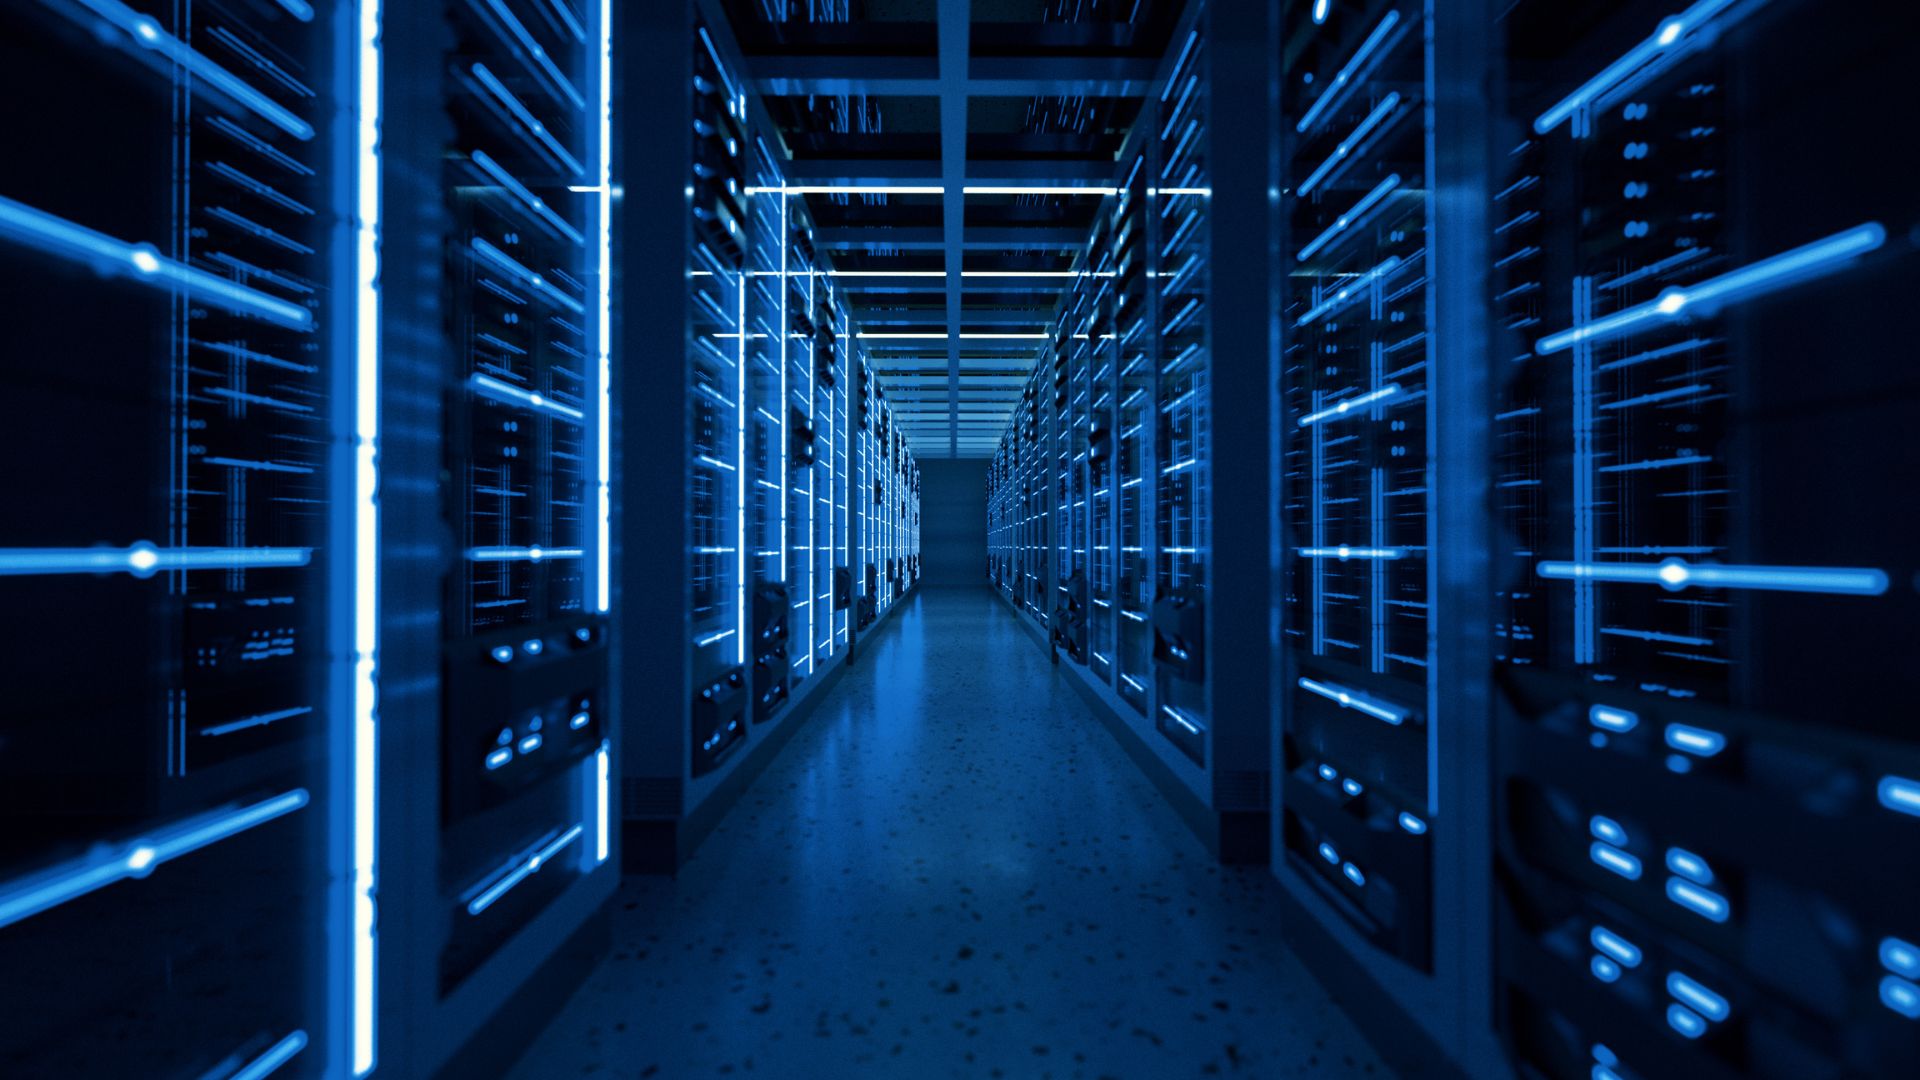 Room of servers stacked on top of each other surrounded by blue lighting